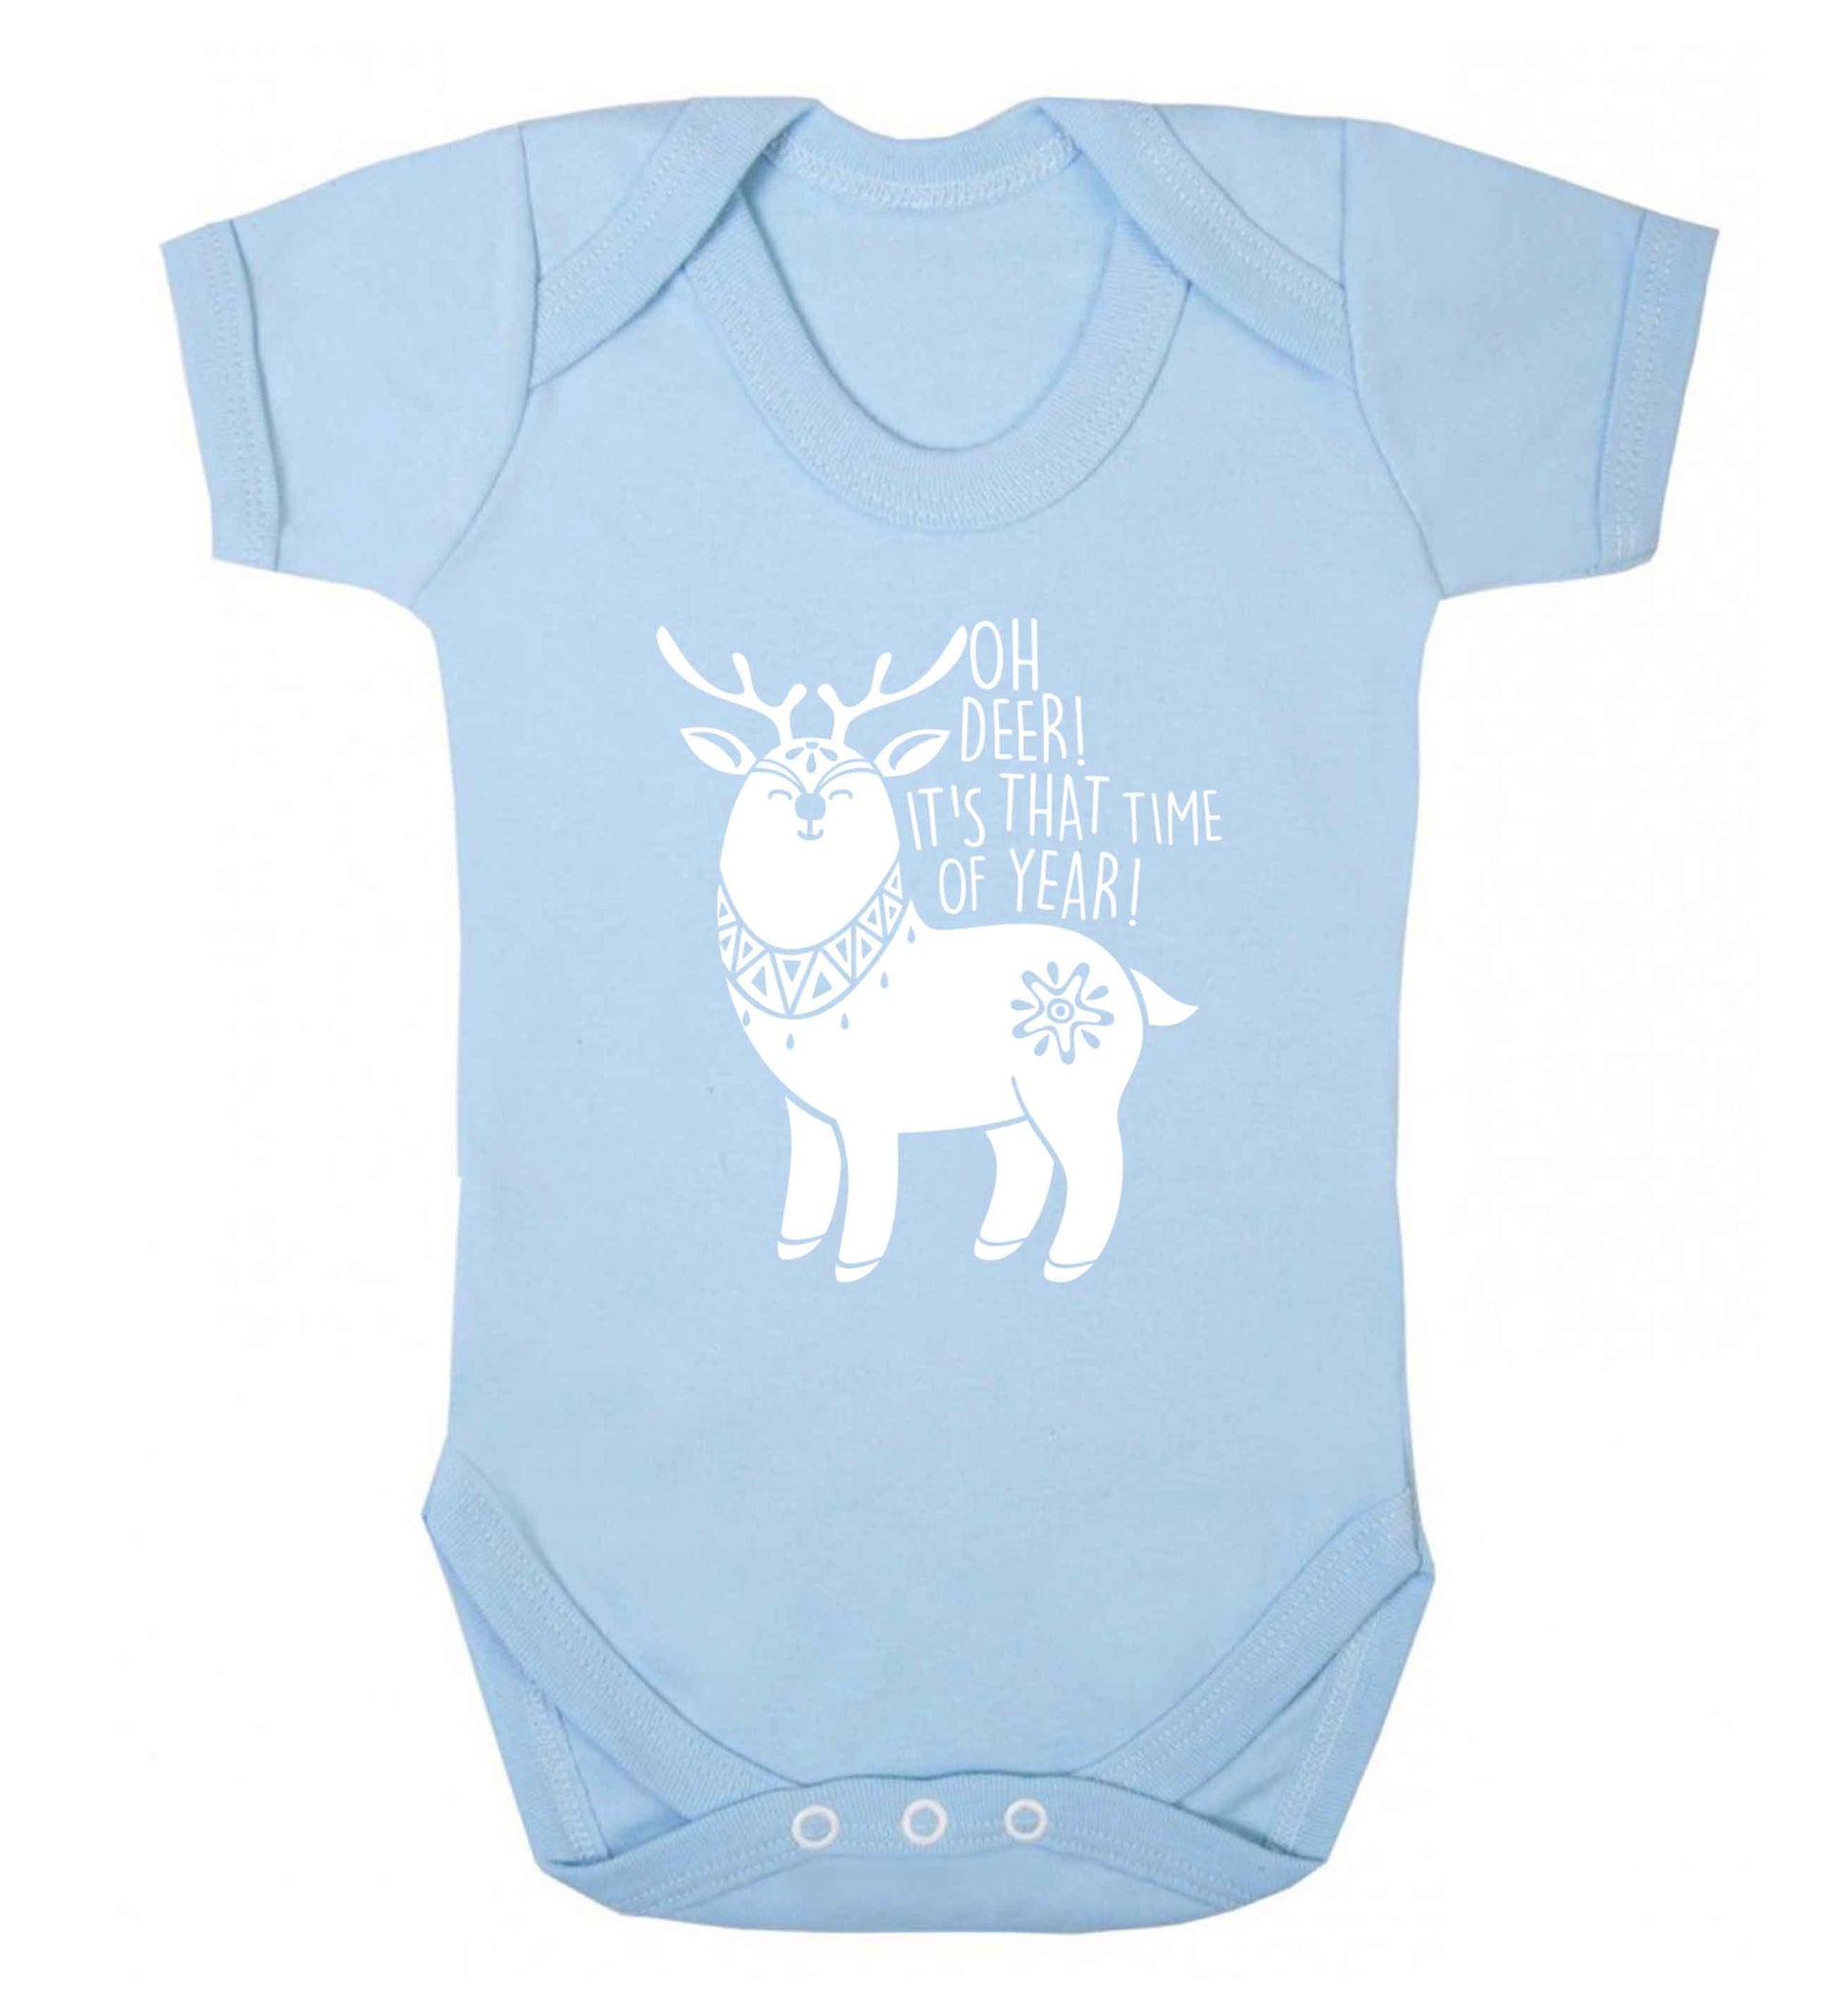 Oh dear it's that time of year Baby Vest pale blue 18-24 months